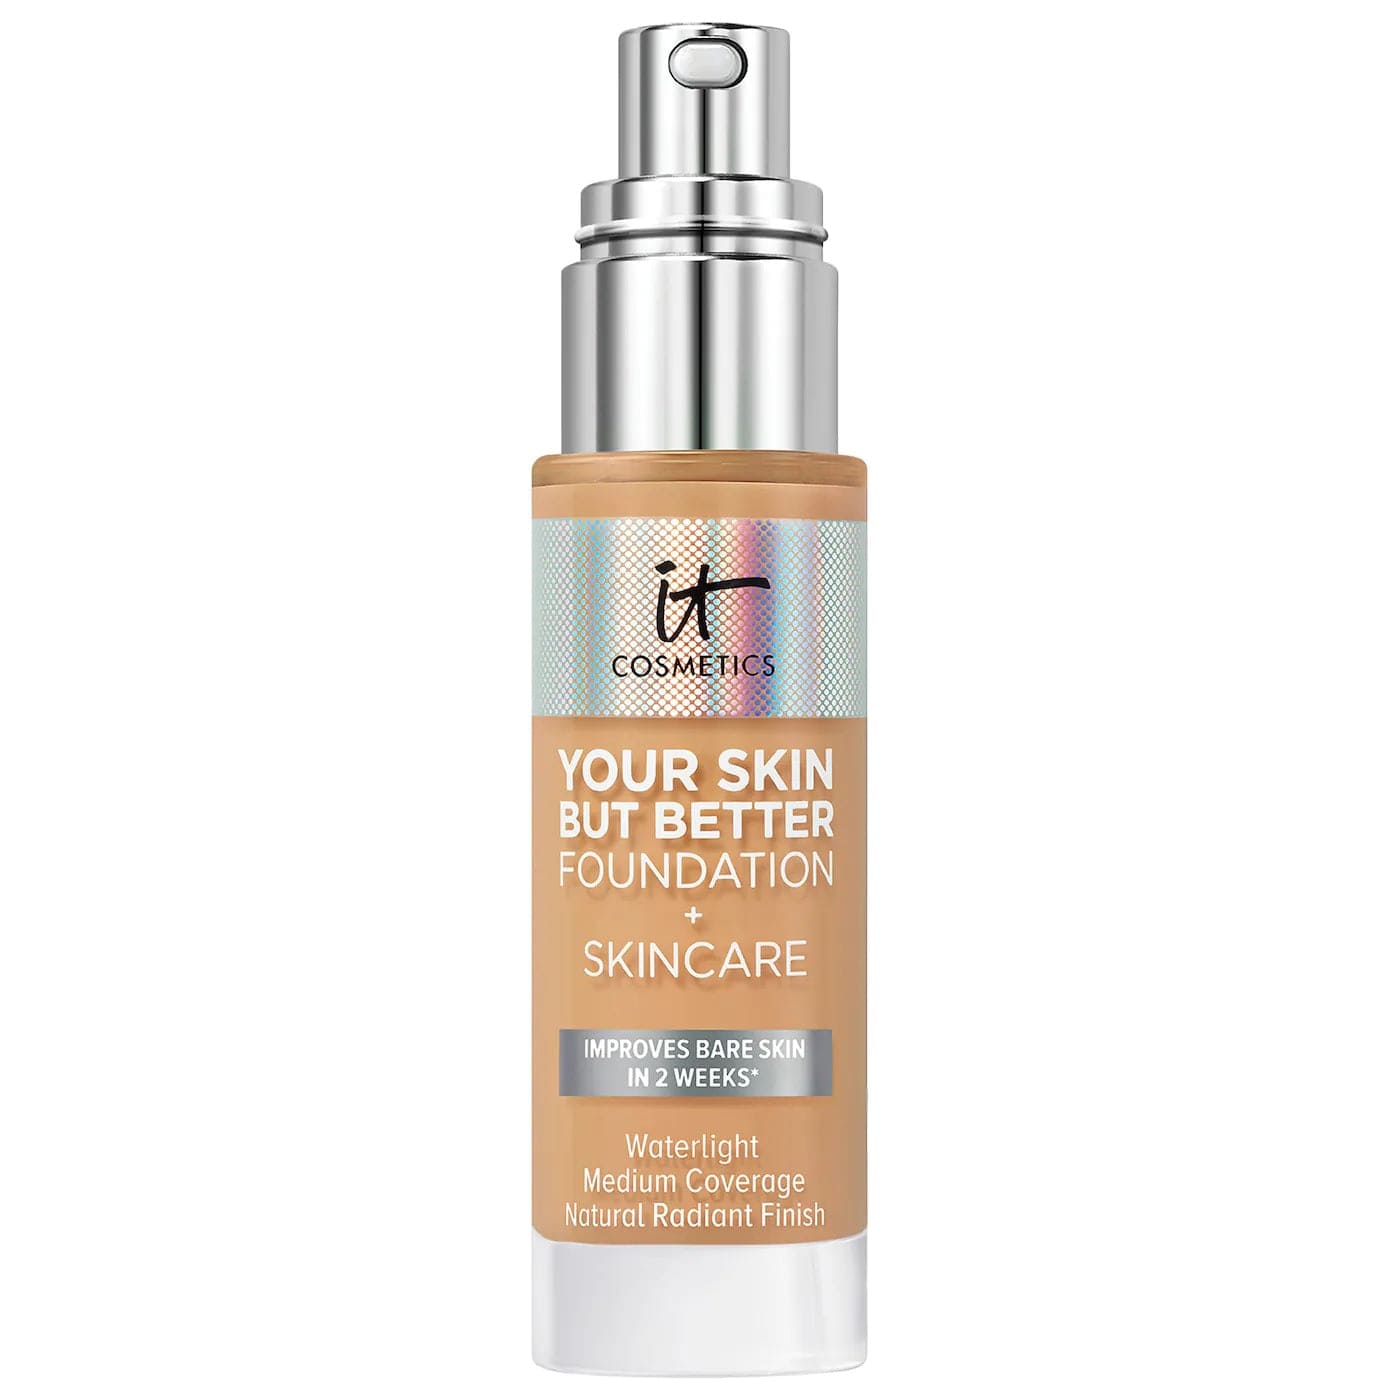 IT COSMETICS Beauty IT Cosmetics Your Skin But Better Foundation and Skincare 30ml - 32 Medium Warm